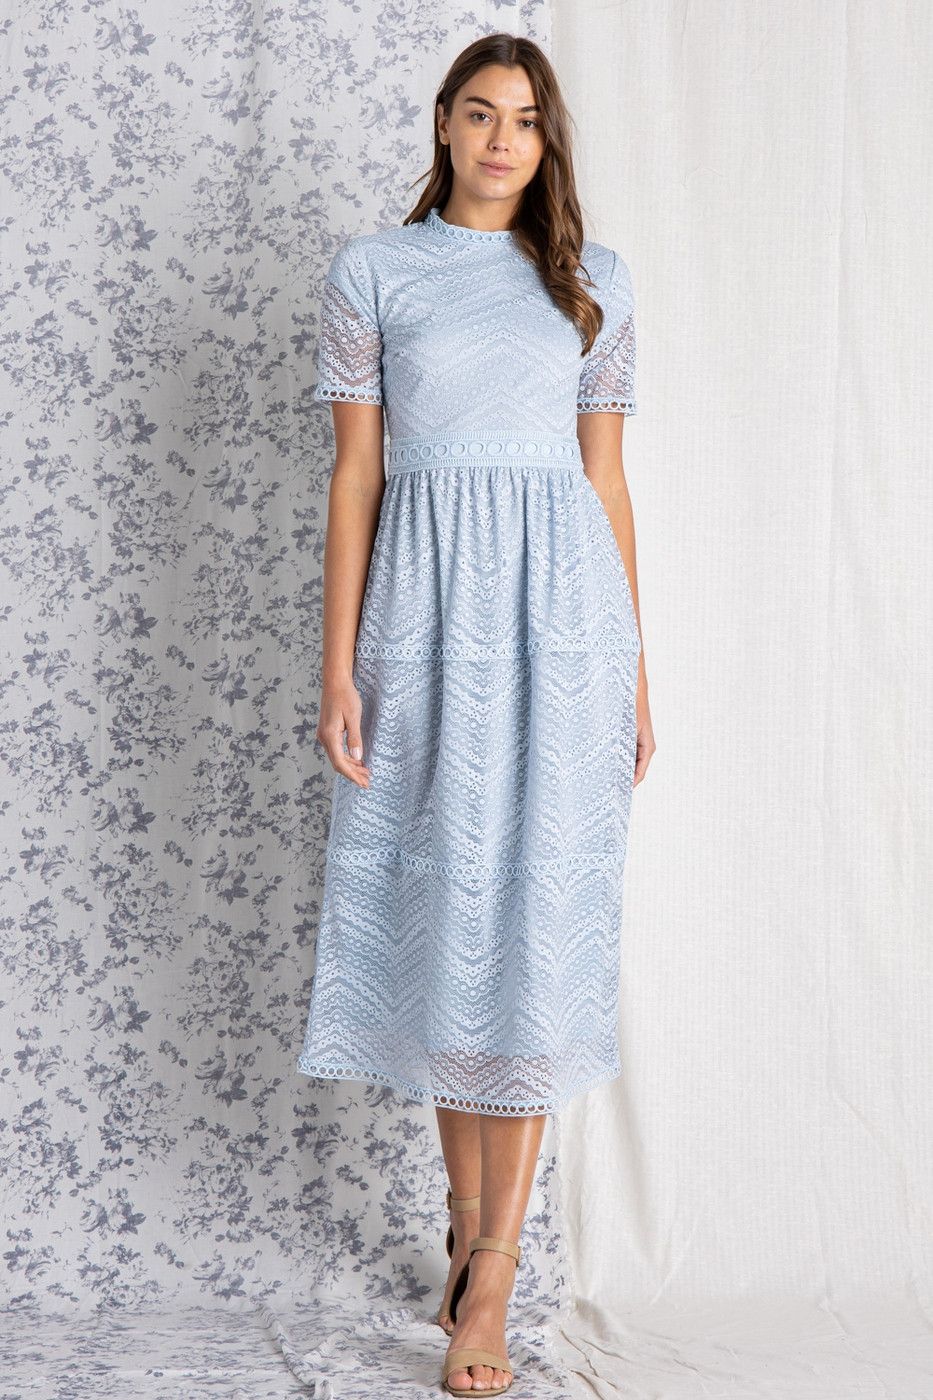 How to Style Light Blue Midi Dress: Best 13 Amazingly Refreshing Outfits for Women